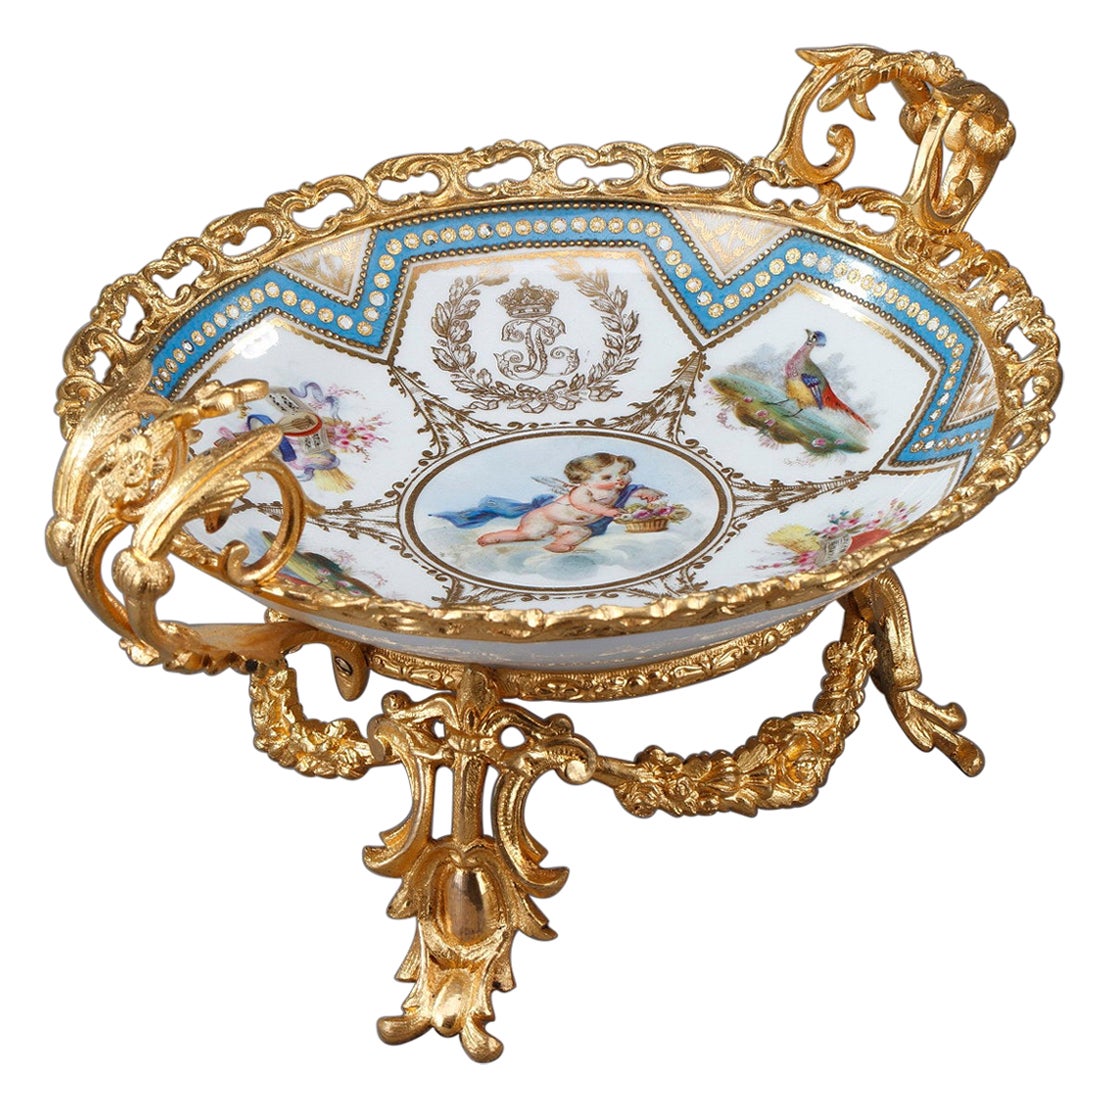 Bowl in Sèvres Porcelain Decorated with a Cupid from the Louis-Philippe Period